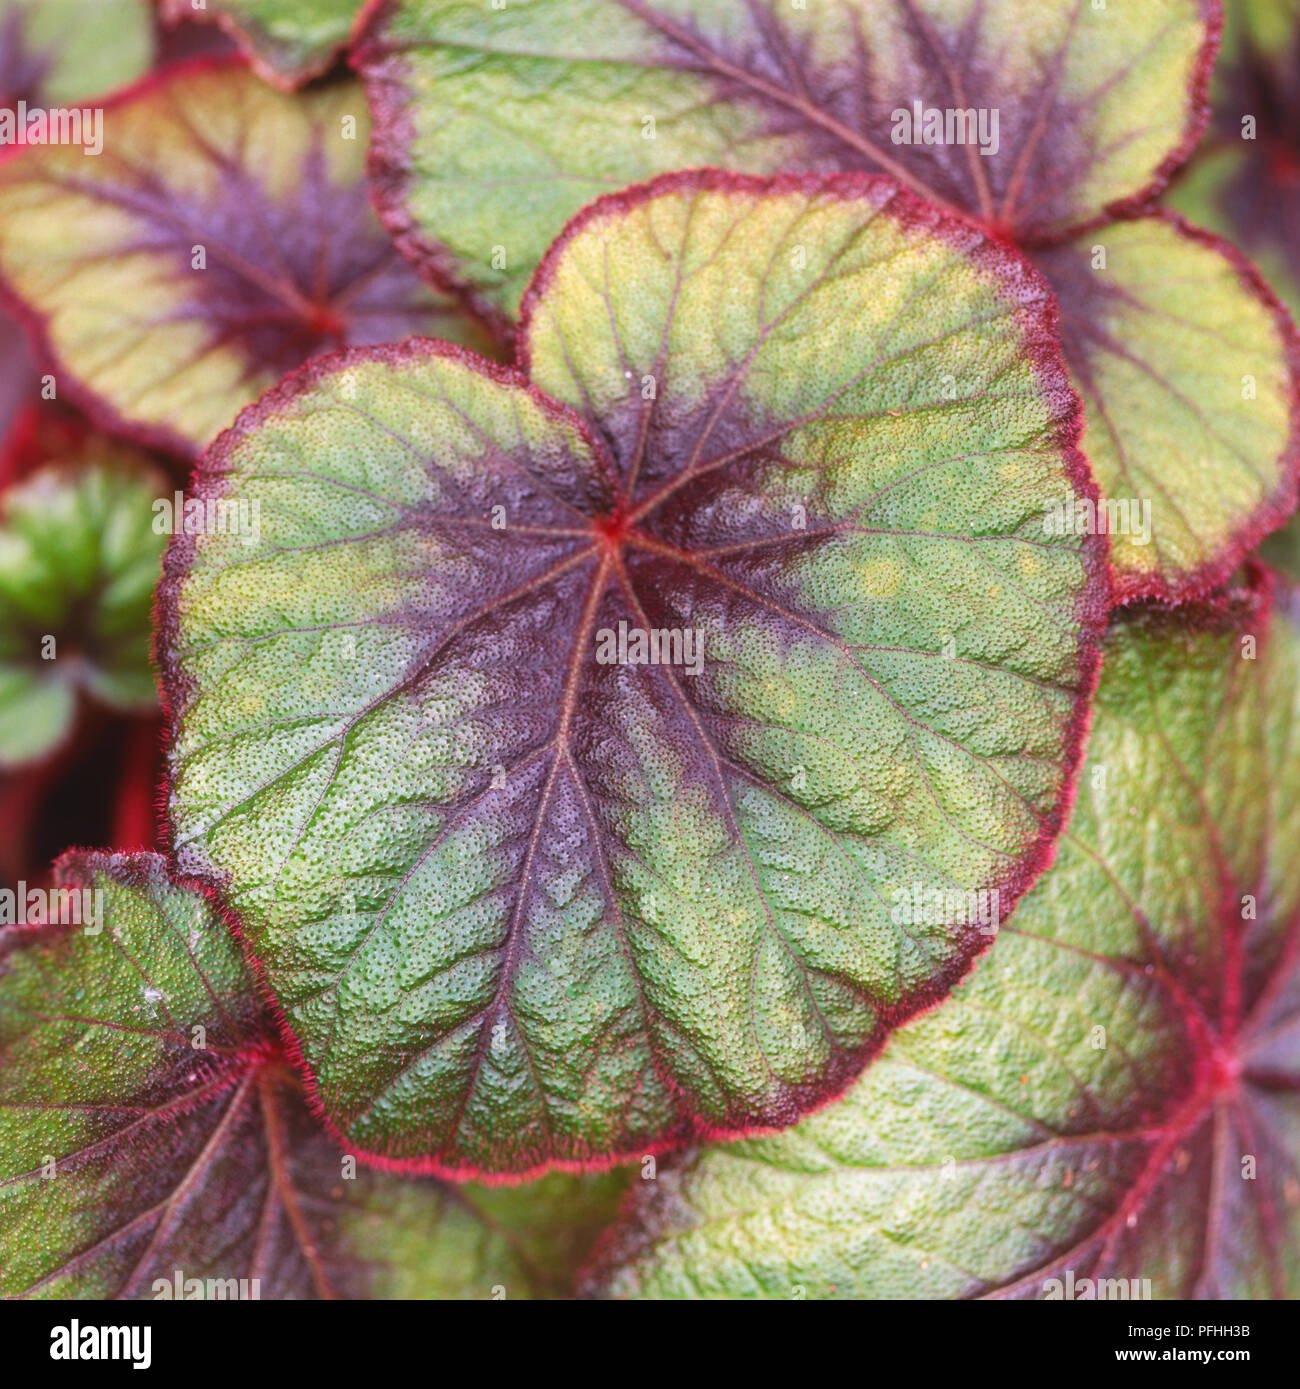 Begonia 'Bettina Rothschild', upright stemmed hybrid leaves with very conspicuous bright red leaf hairs. Stock Photo